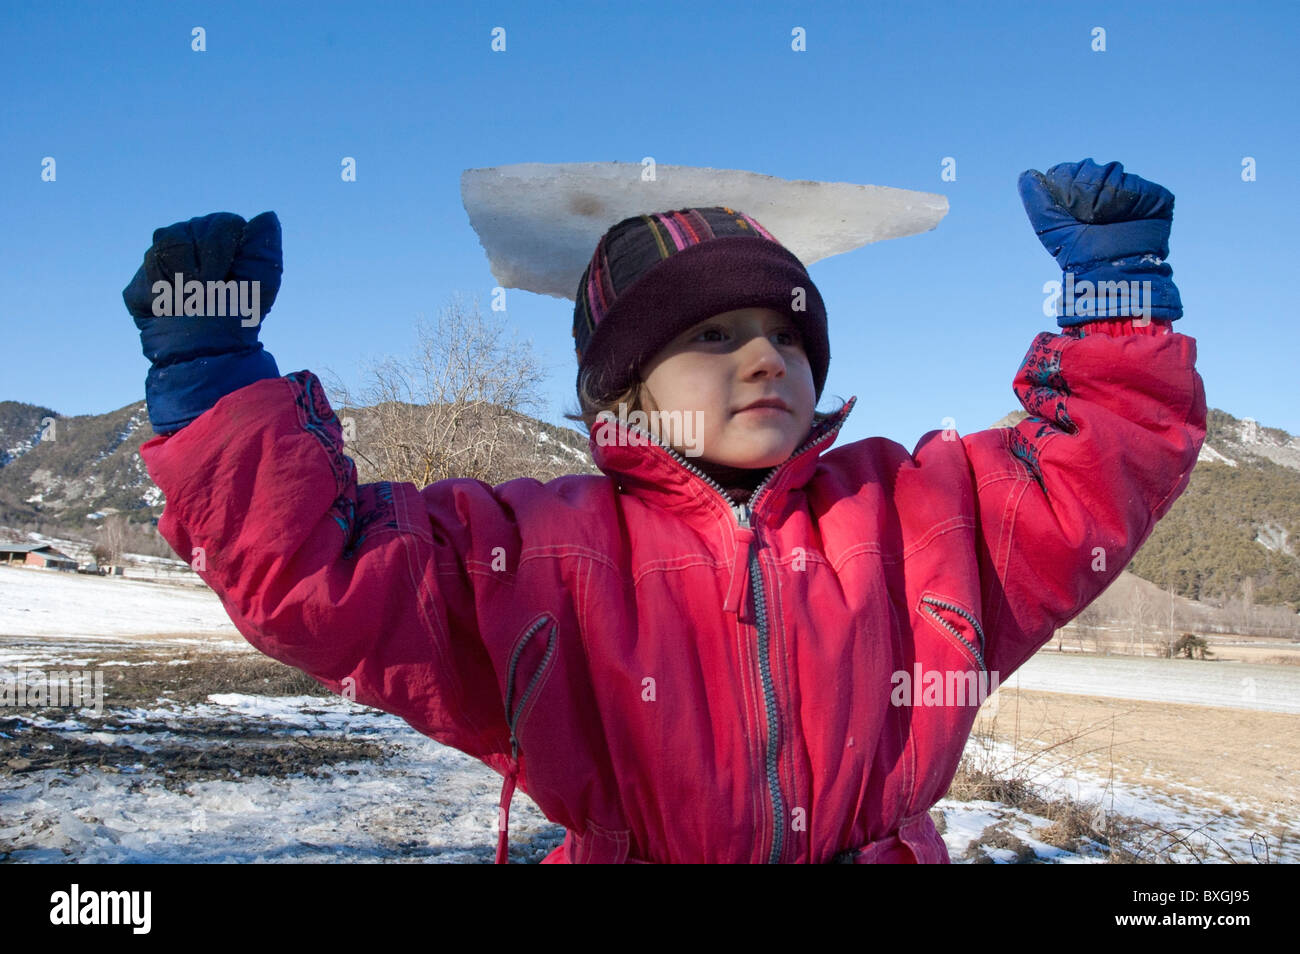 Young girl balancing a piece of ice on her head as a trophy. Stock Photo